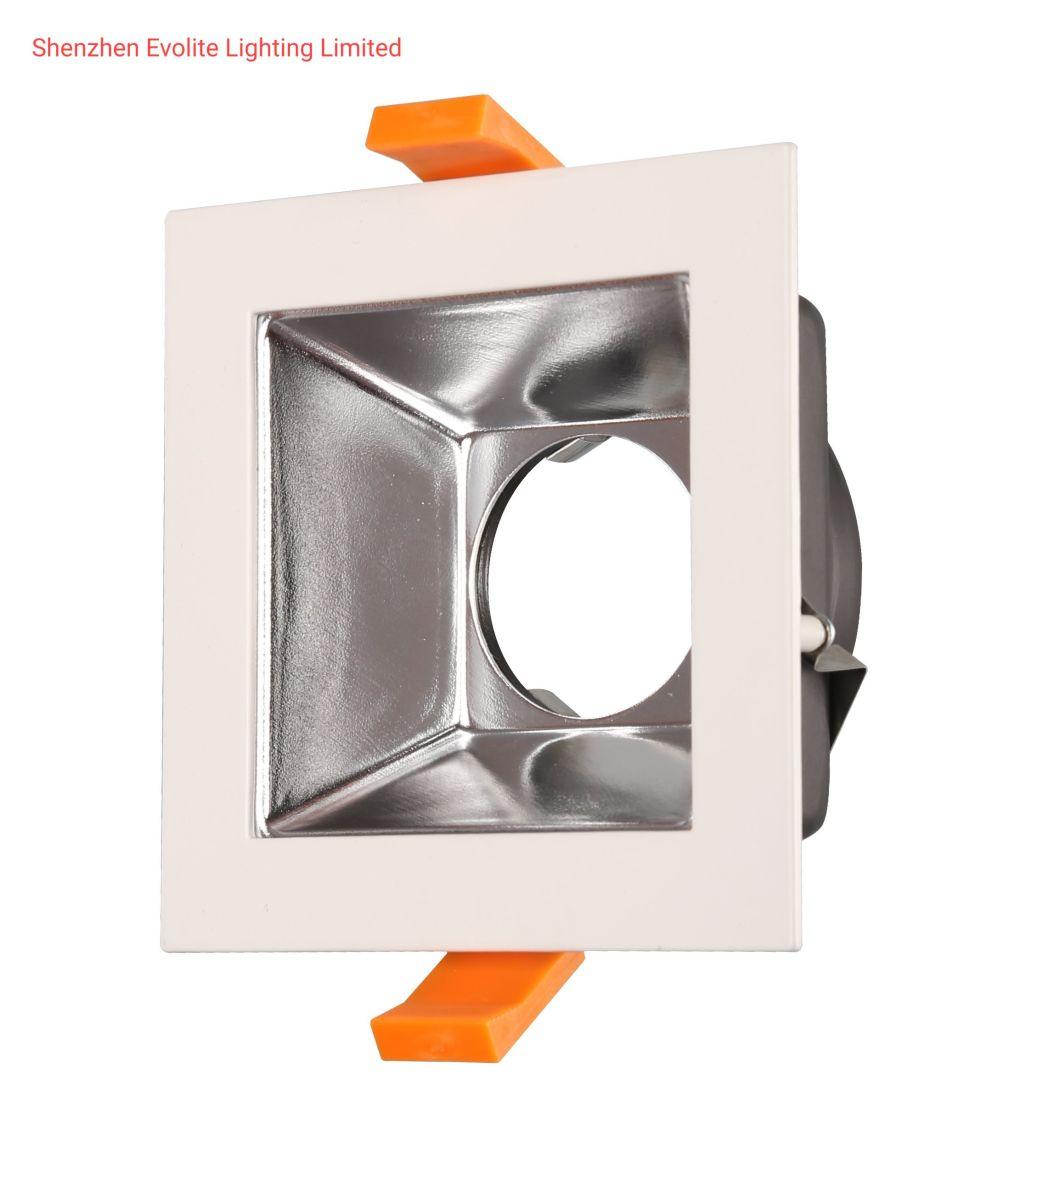 Square IP44 Recessed Dounlight LED Ceiling Downlight Housing for LED Down Light